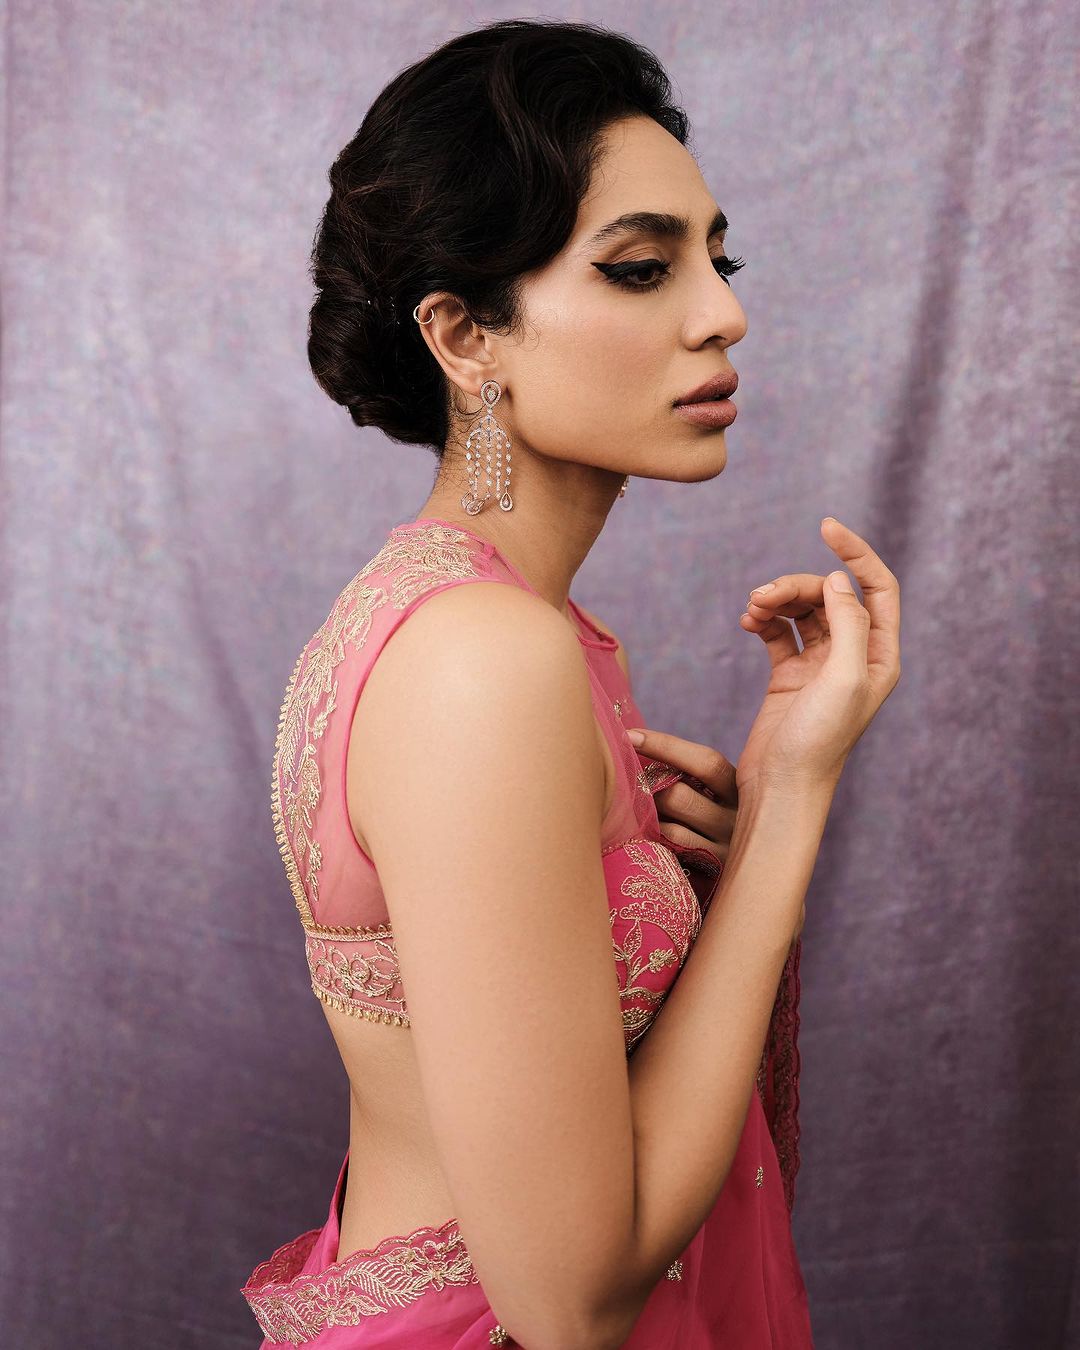 Actress sobhita dhulipala looks spicy in this saree images-Actresssobhita Photos,Spicy Hot Pics,Images,High Resolution WallPapers Download